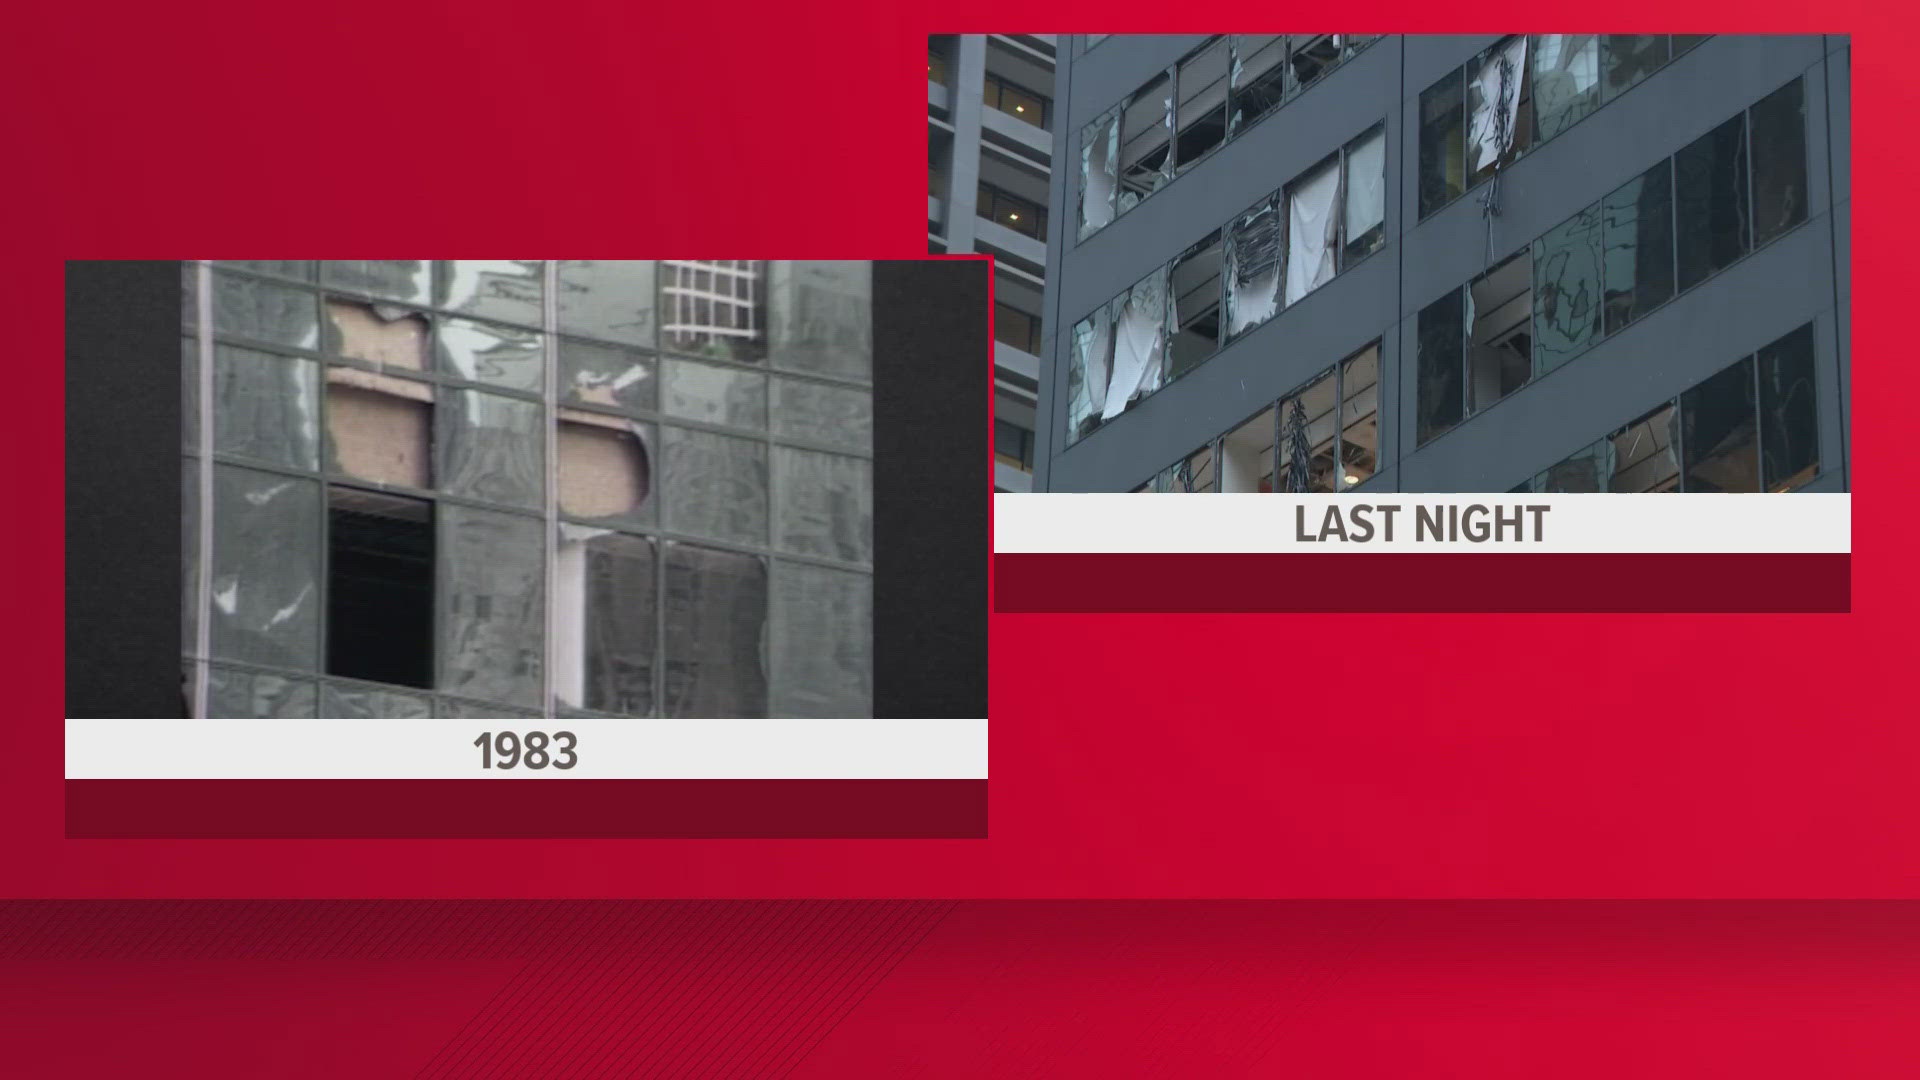 Our editing team found video from Alicia in 1983 and compared the scenes to Thursday night in downtown Houston.